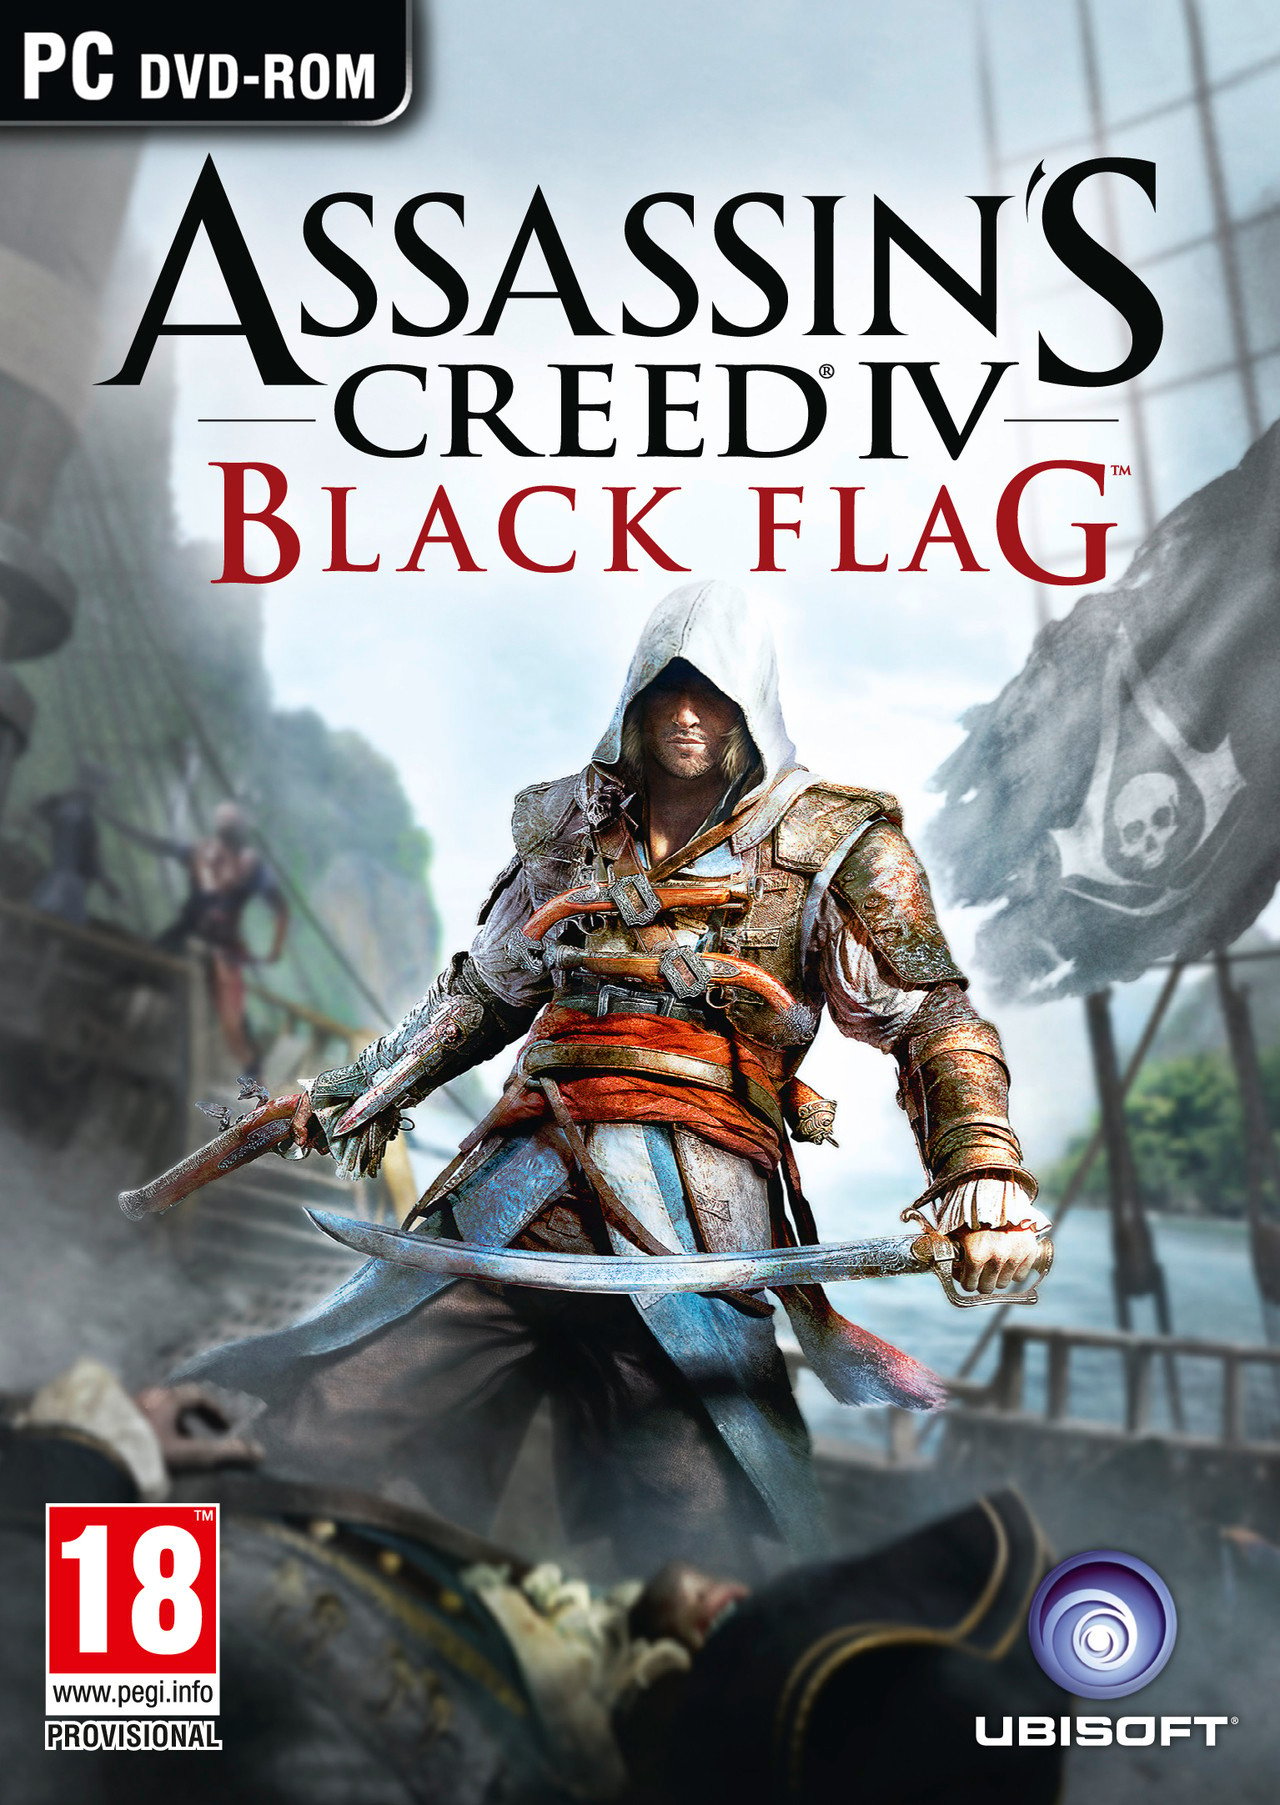 assassin creed 4 black flag cheats for ps 4 pro